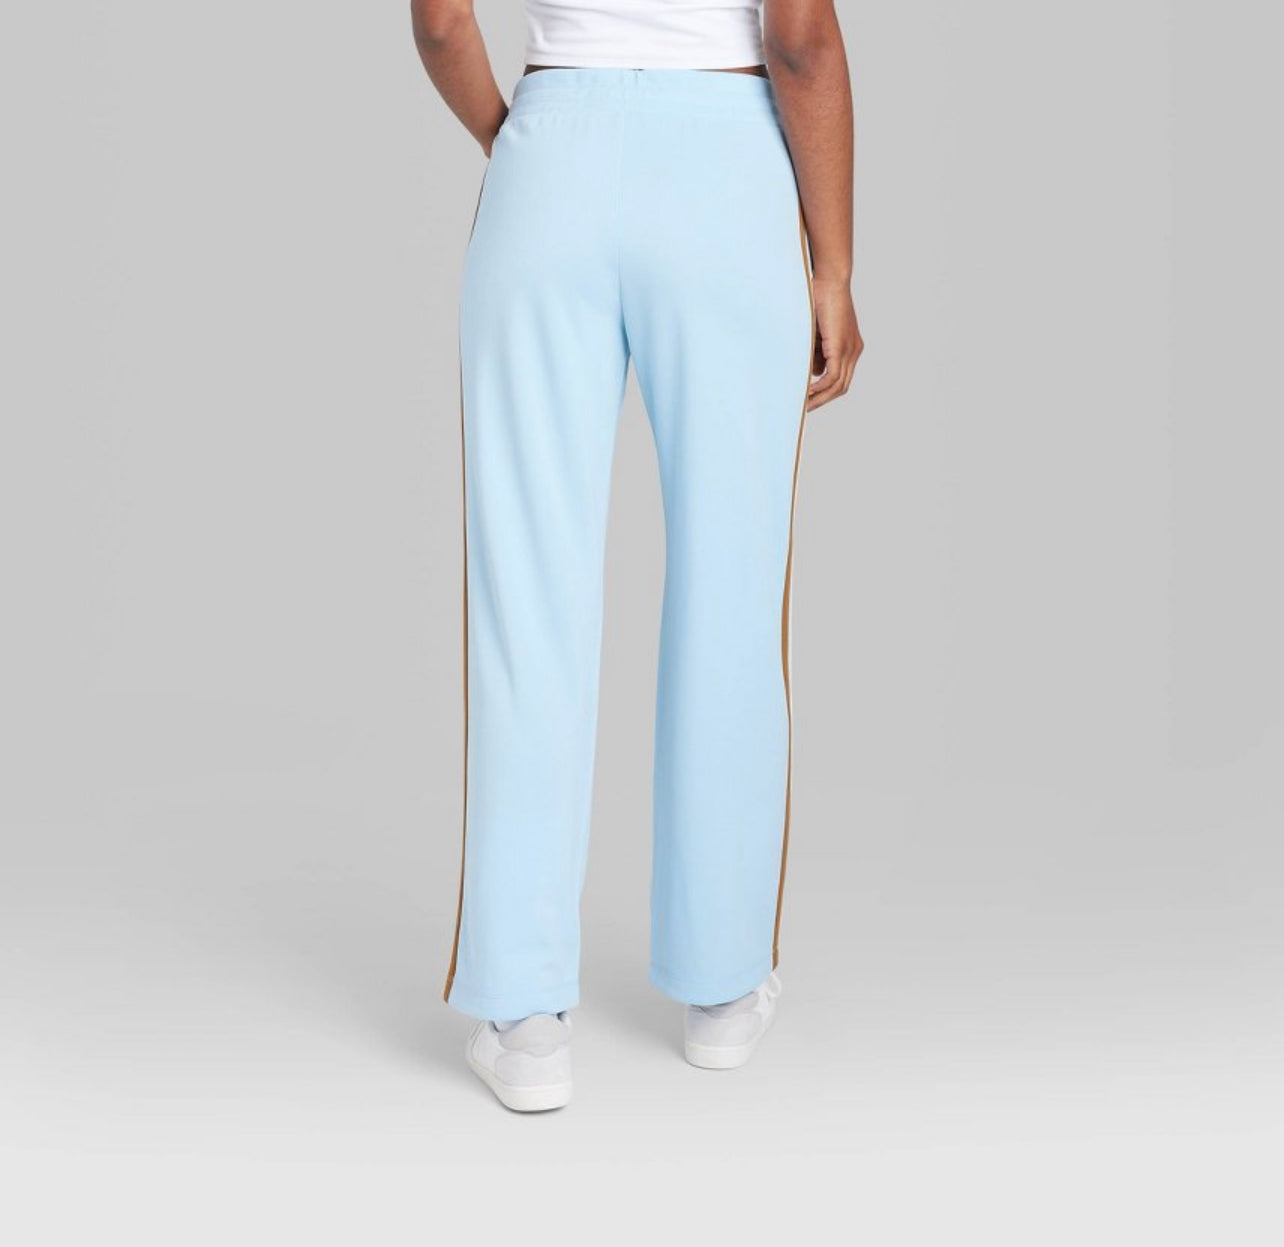 Women's High-Rise Track Pants - Wild Fable Blue SM